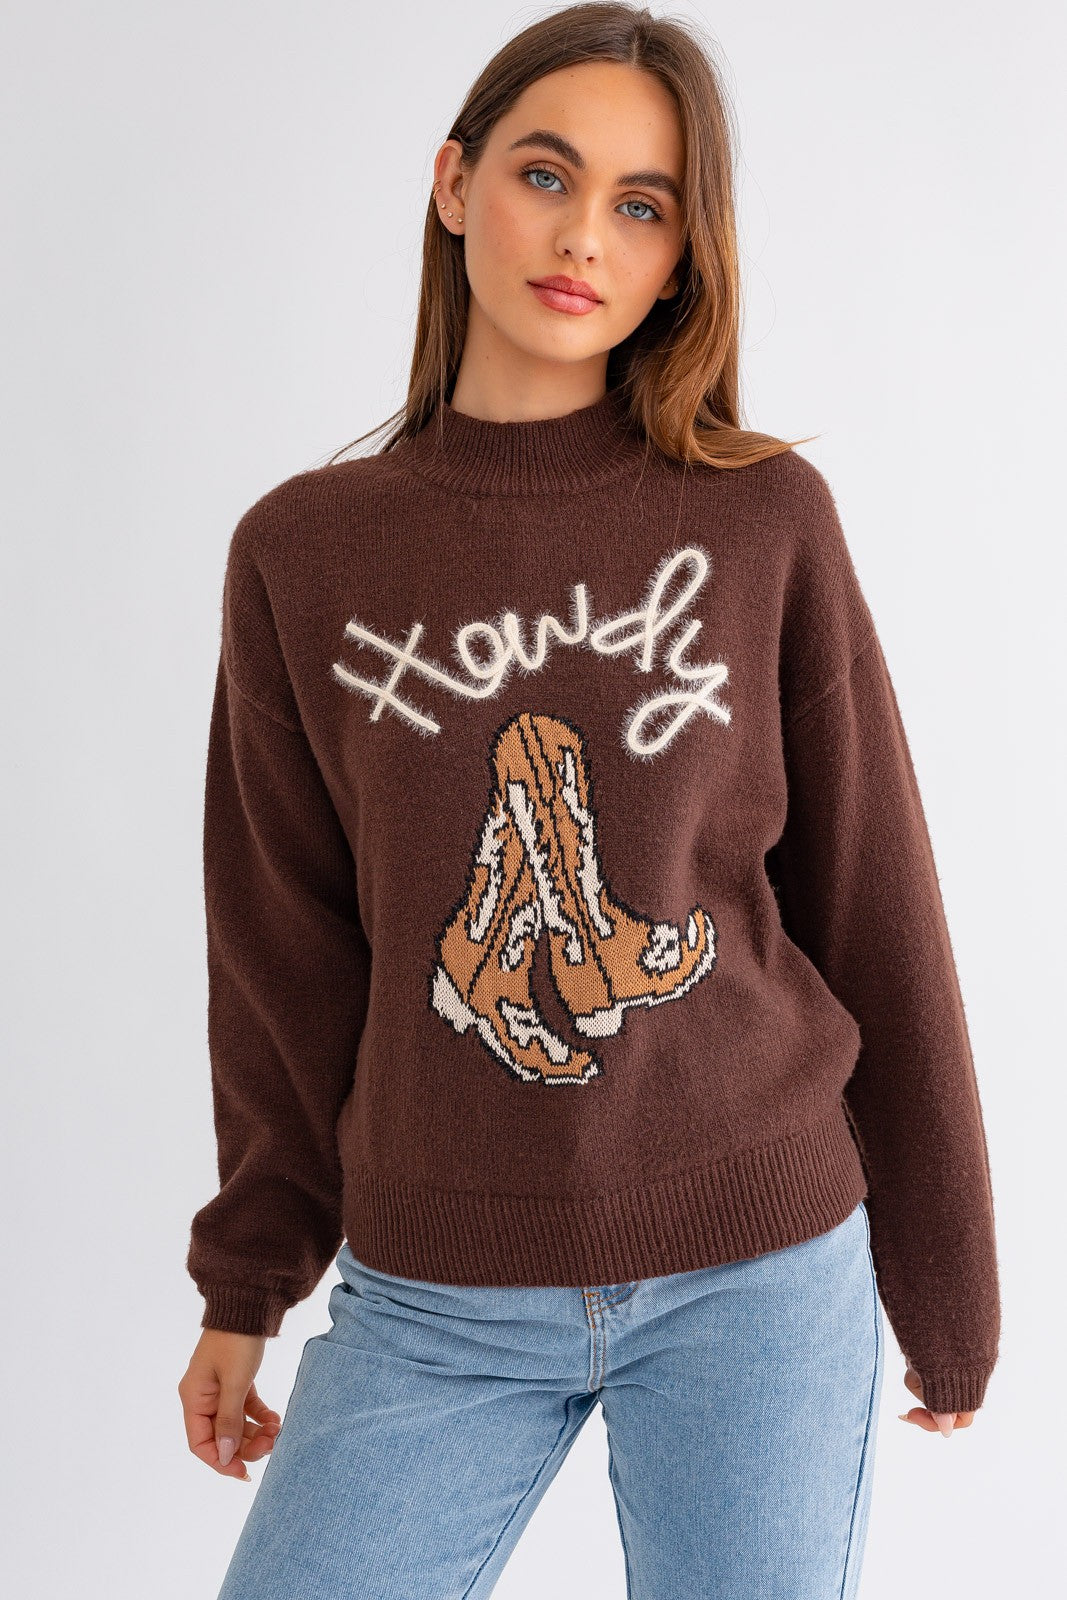 tinsel howdy sweater